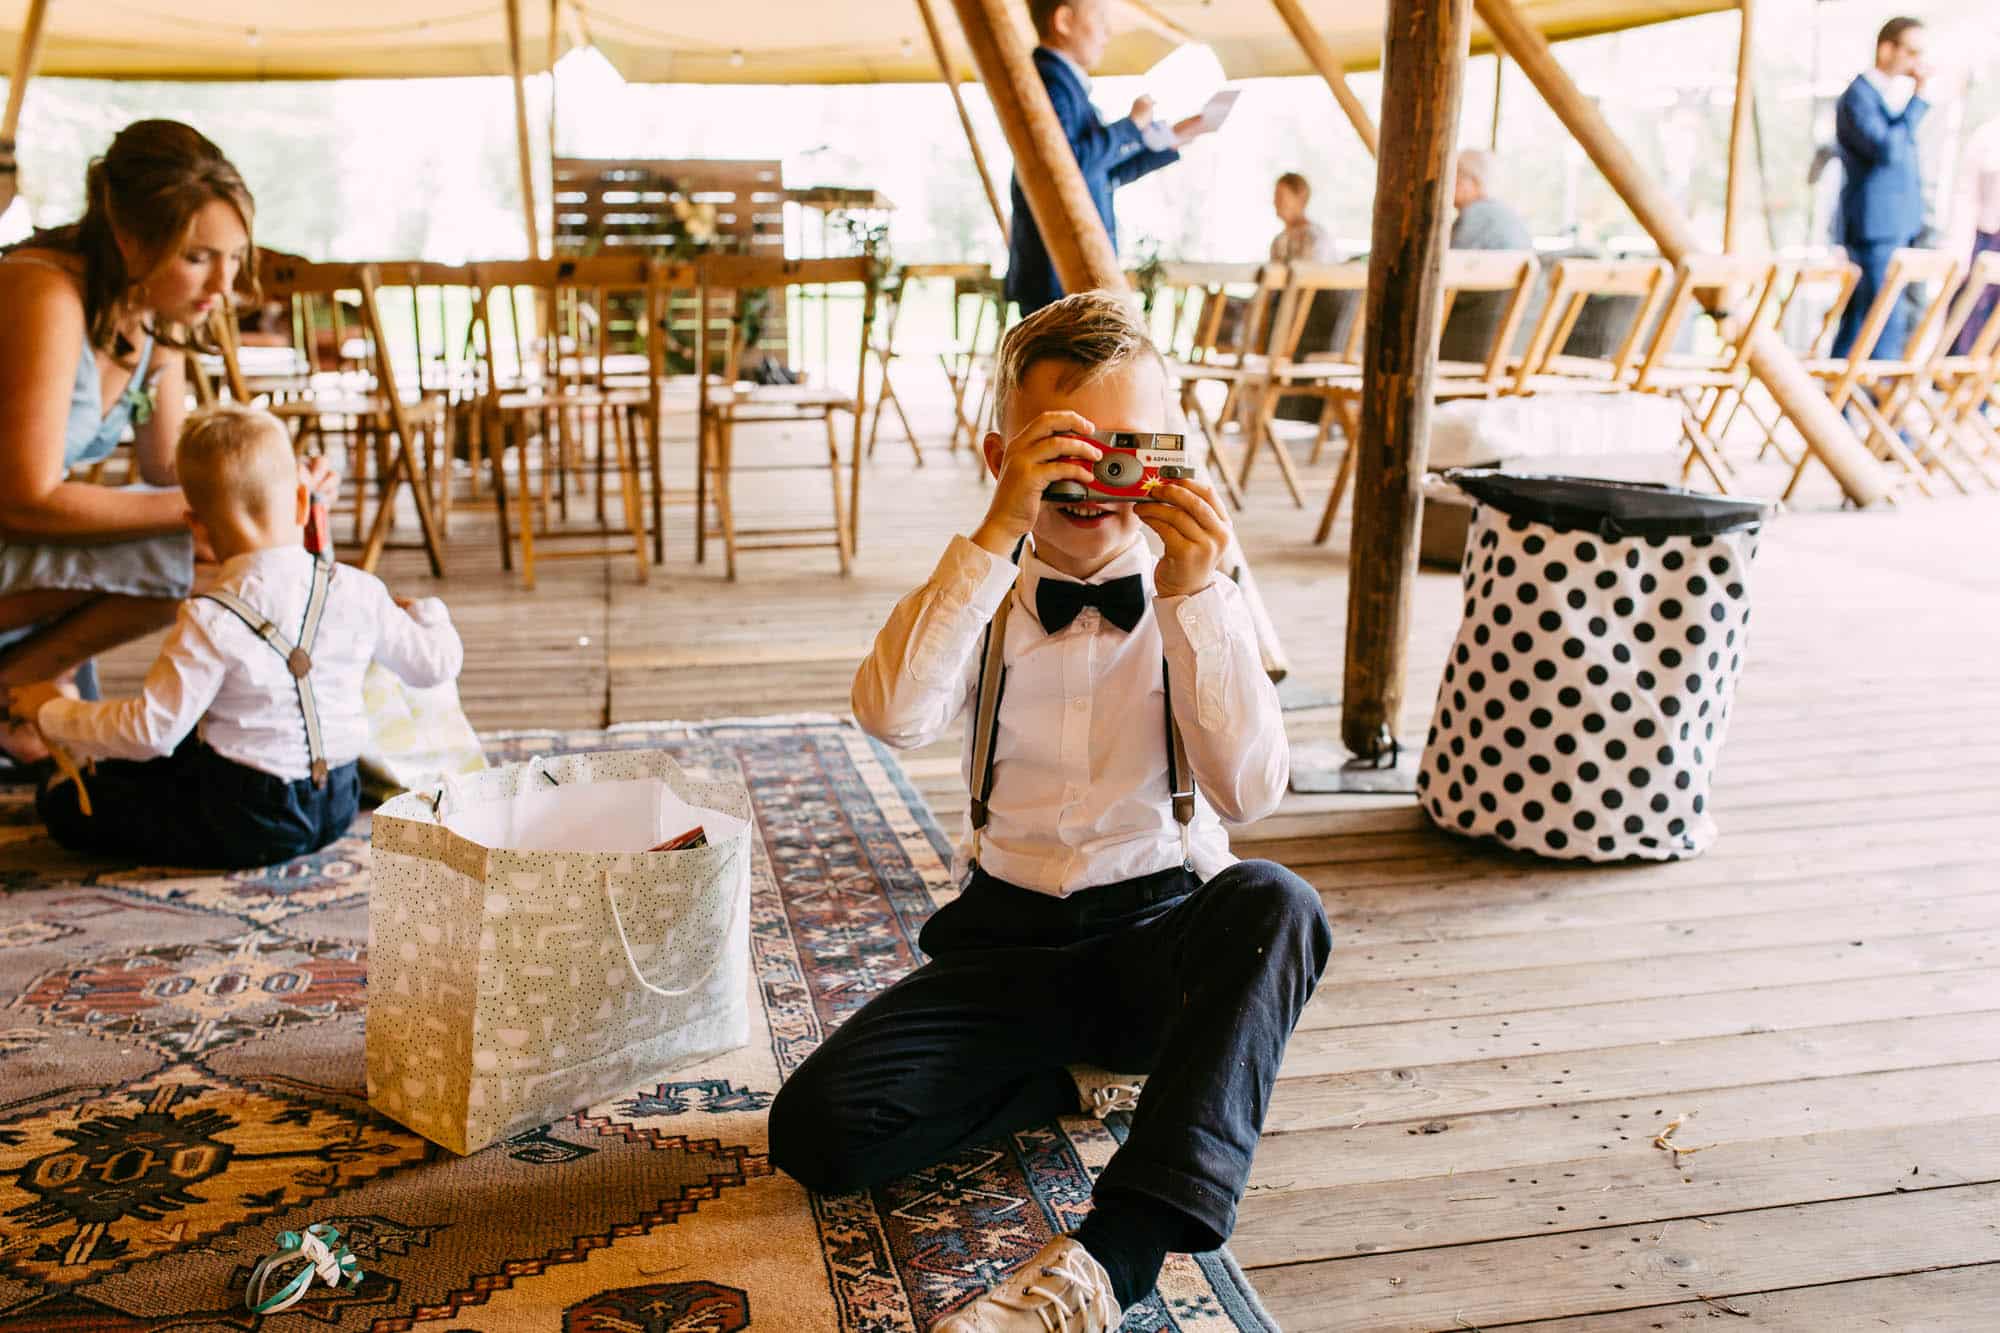 A little boy sits on the ground in front of a tent, engrossed in wedding games.